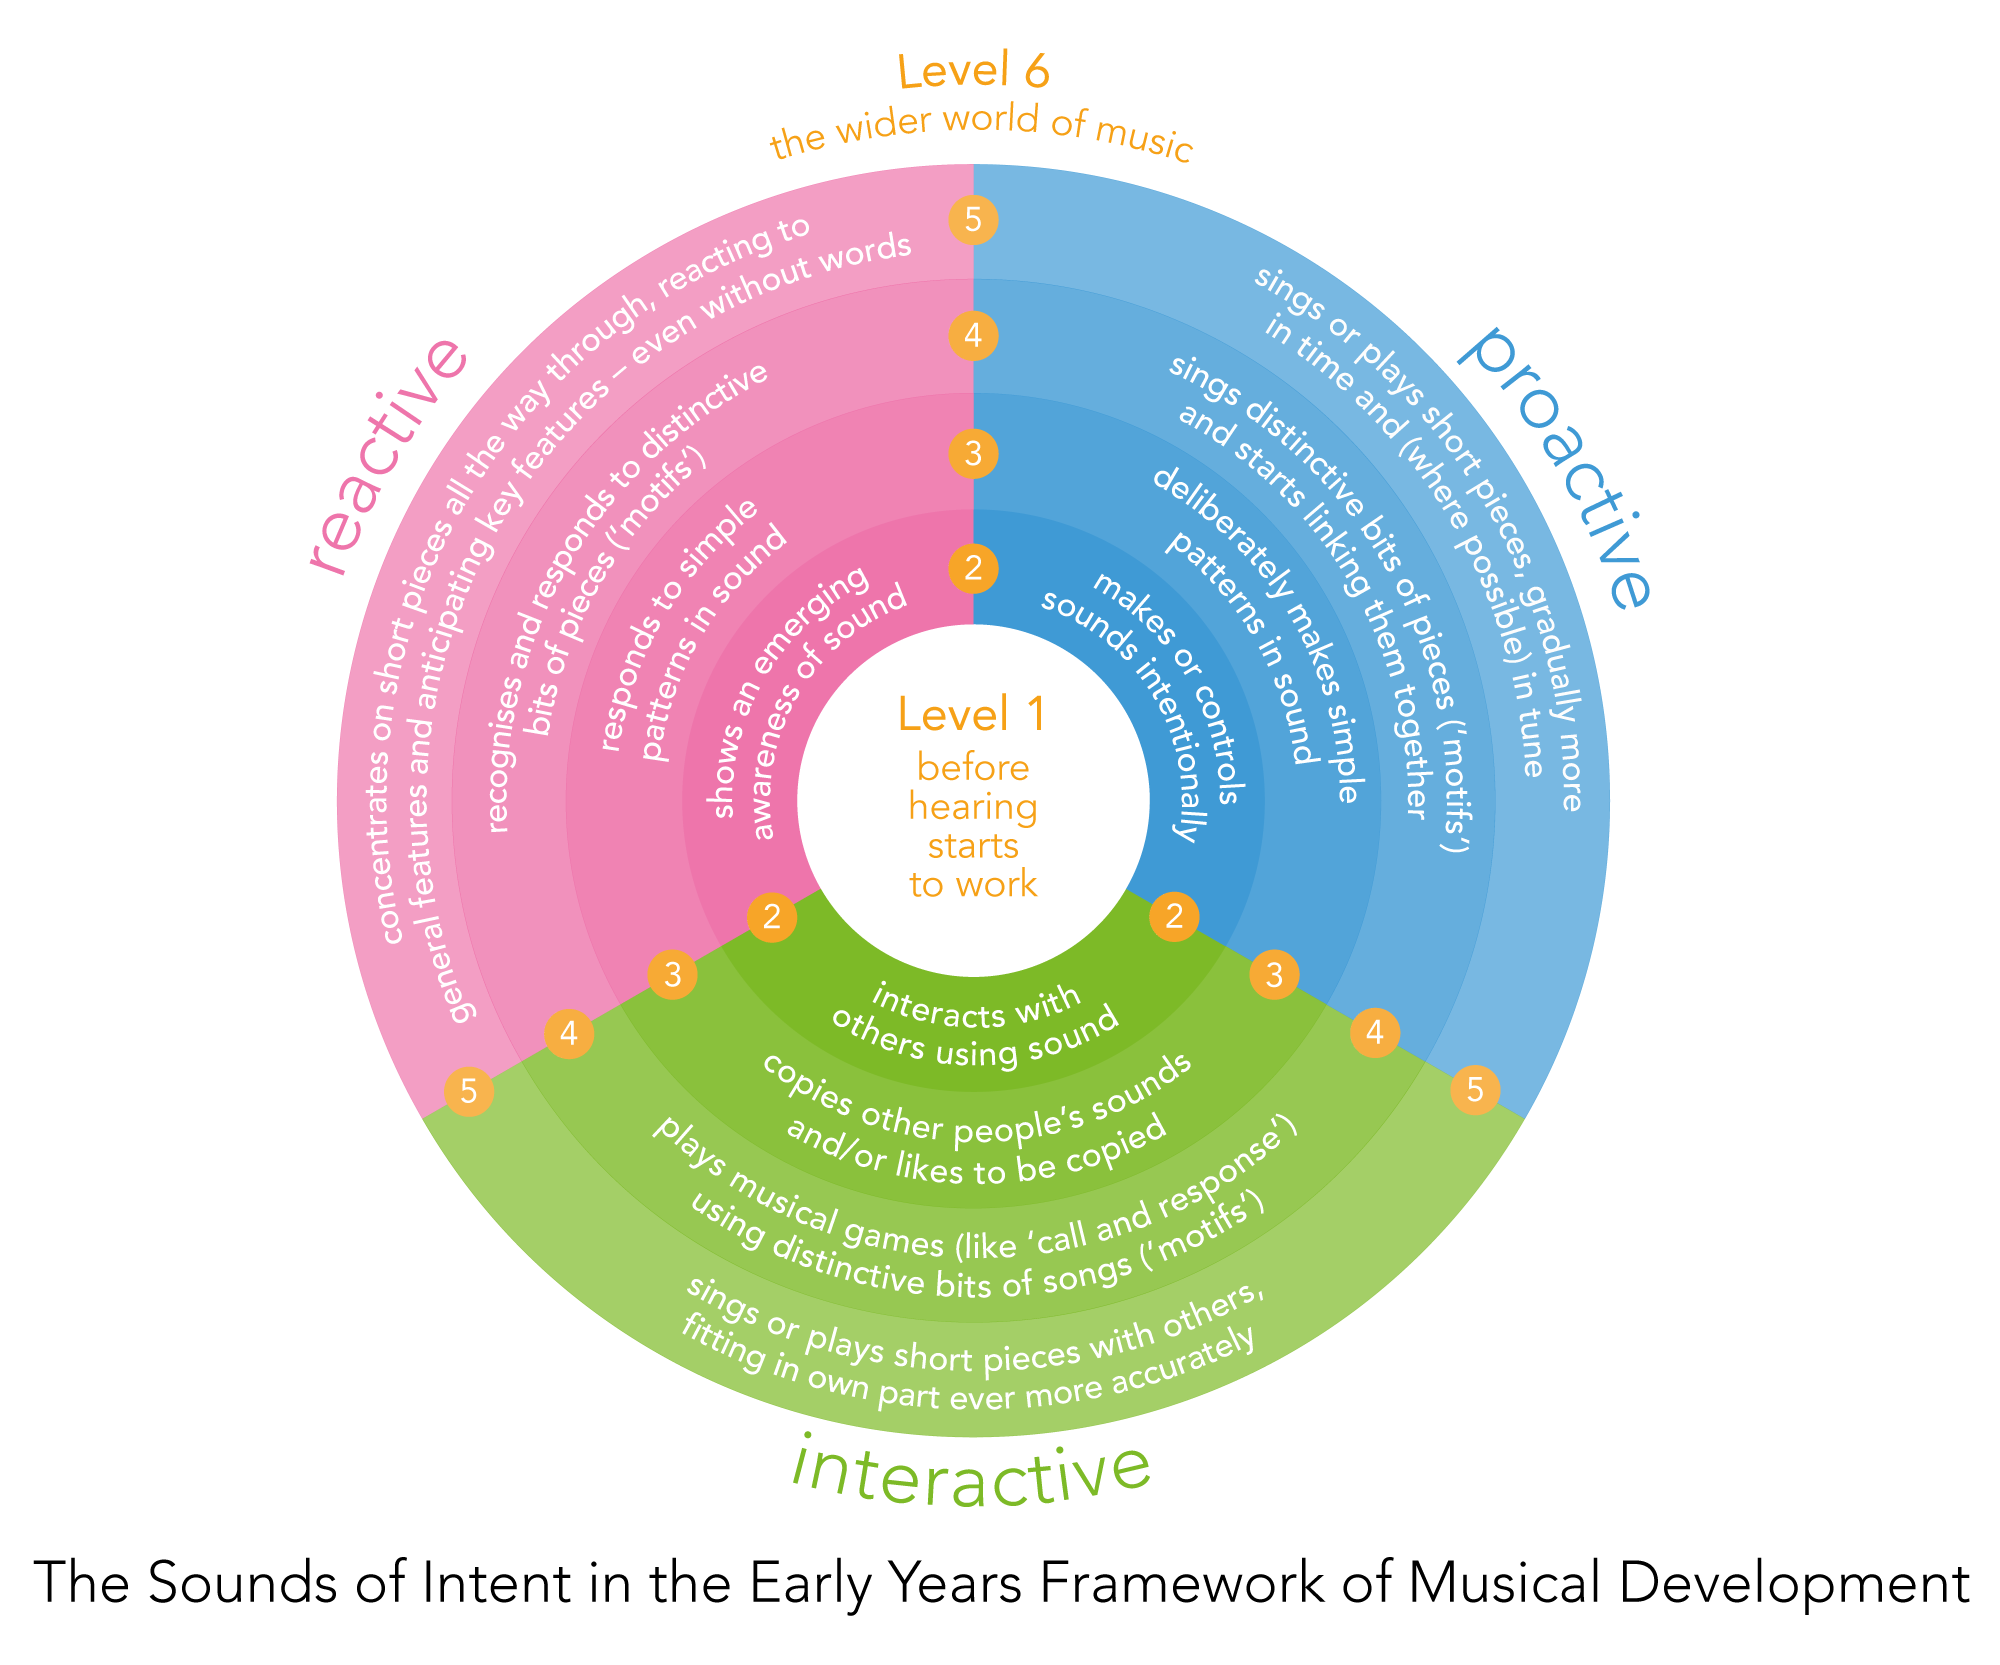 The-Sounds-of-Intent-in-the-Early-Years-Framework-of-Musical-Development